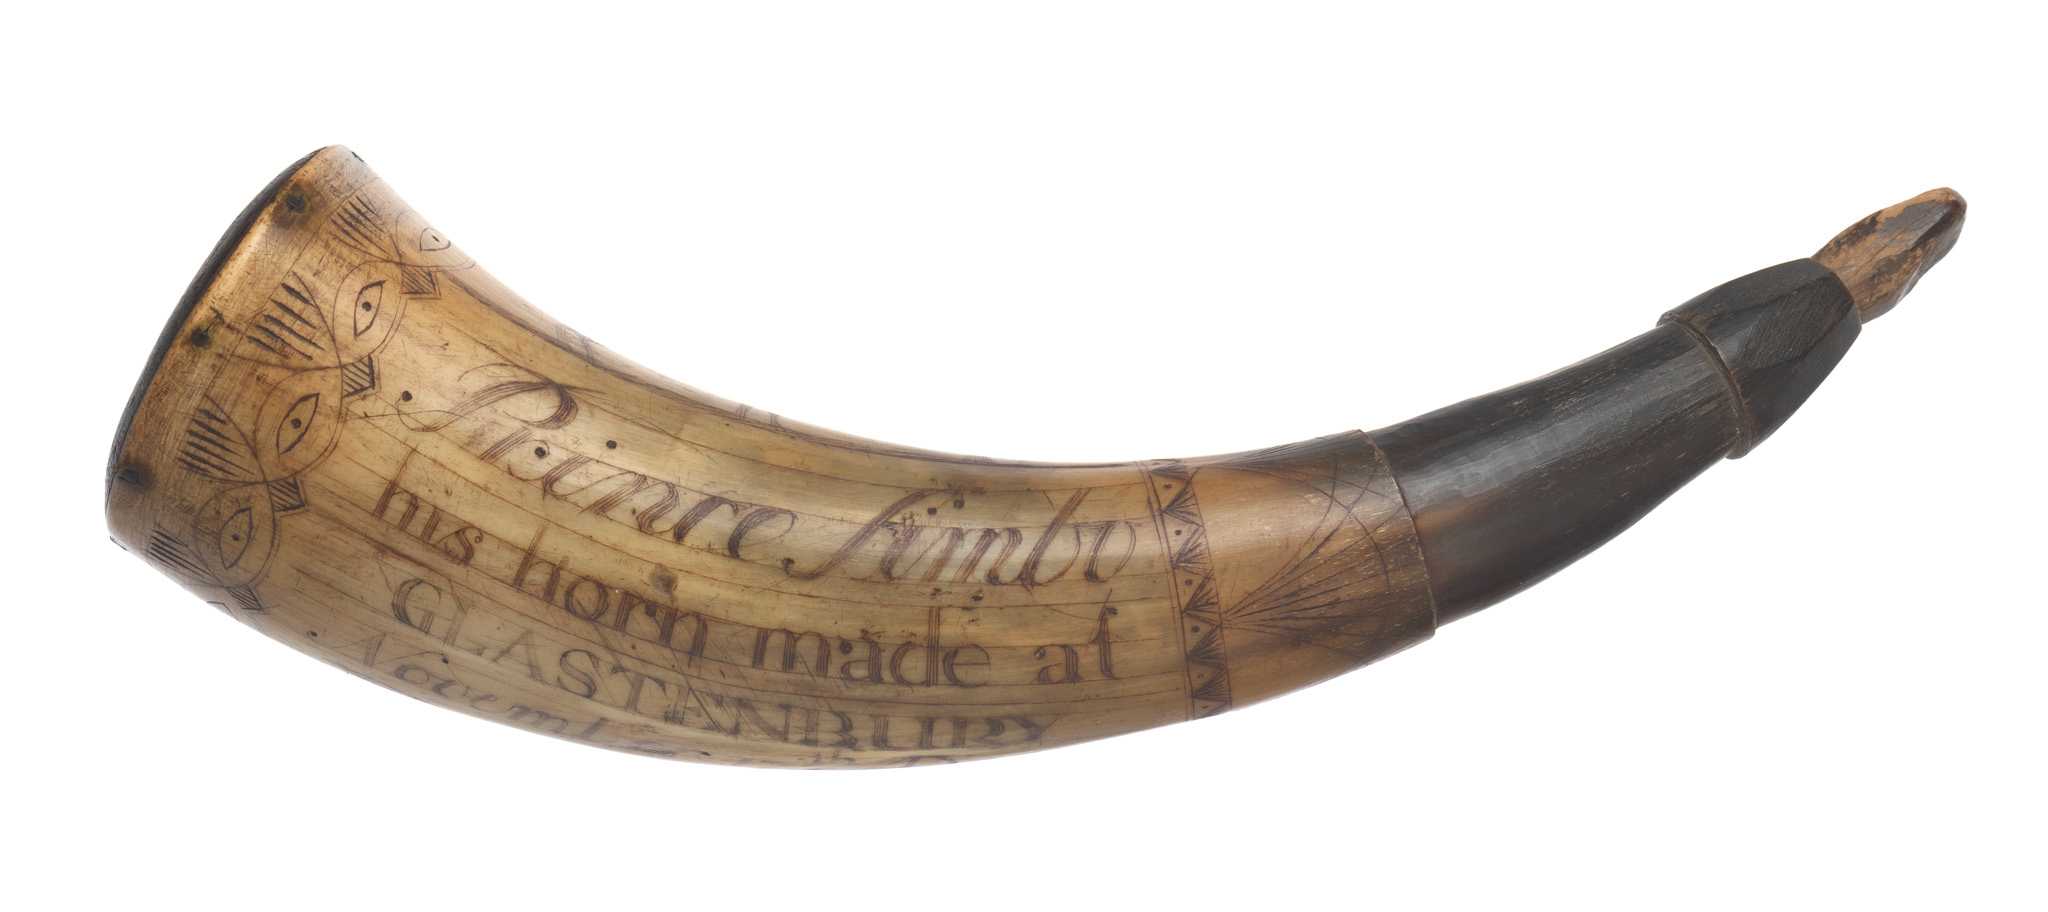 An engraved powder horn with stopper. The ox horn is carved with images of a dove carrying a banner reading "LIBERTY," a deer, the sun with a face, and a pine tree. An intricate design featuring eyes encircles the outer edge of the horn. The name Prince Simbo and the date November 17, 1777 are also engraved on the horn.